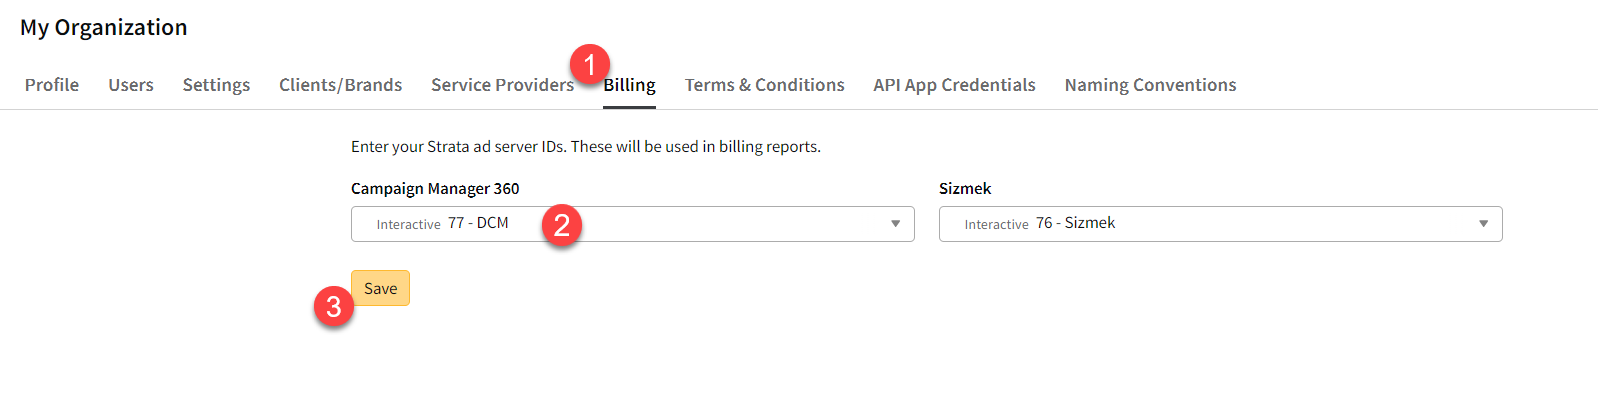 Billing tab in My Organization showing the Campaign Manager 360 and Sizmek fields.